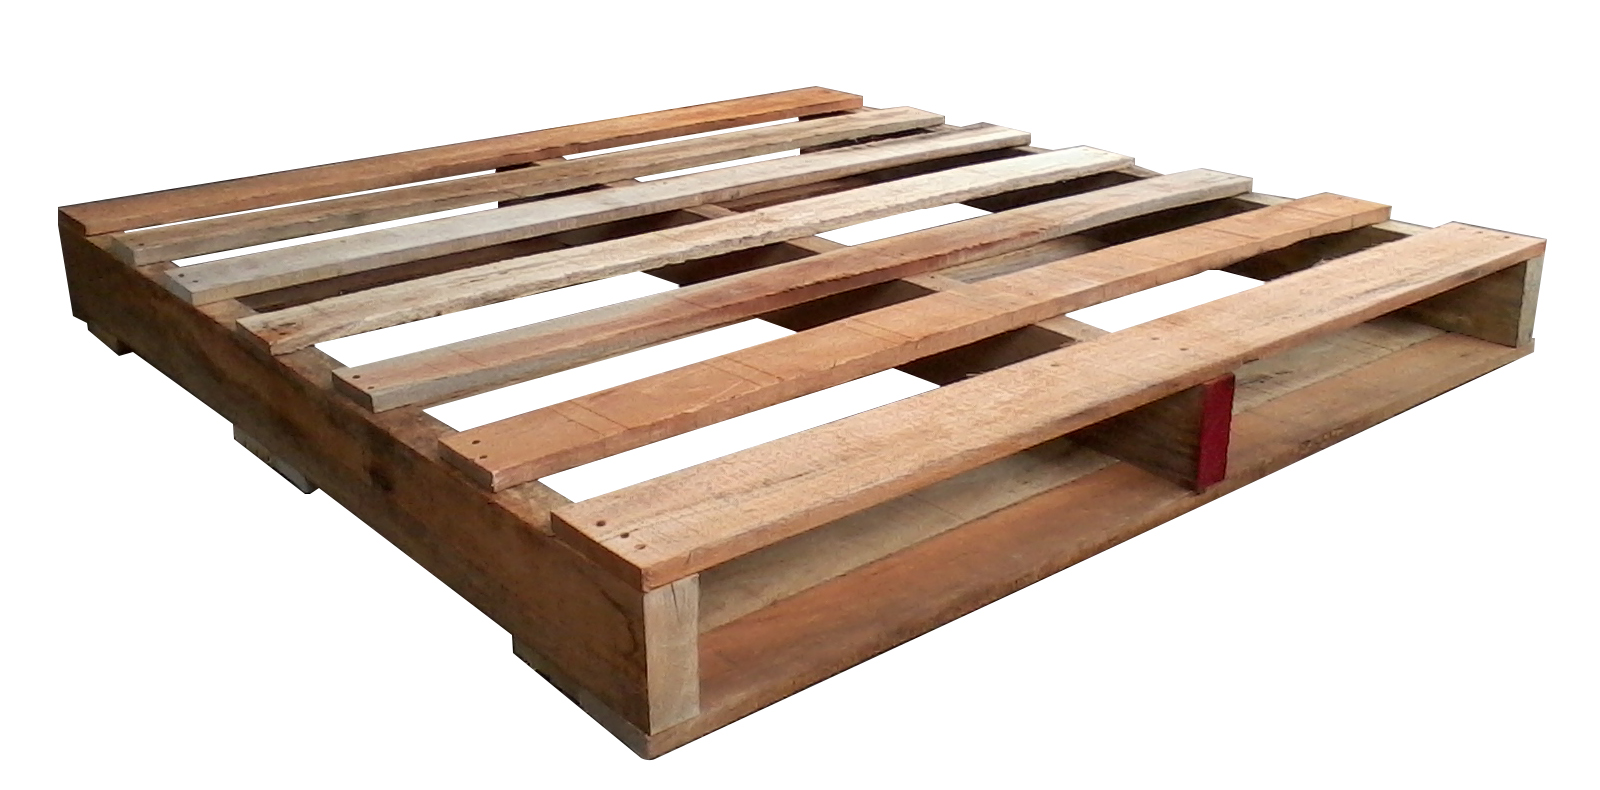 Two Entry Wooden Pallet Malaysia| PalletXPert.com